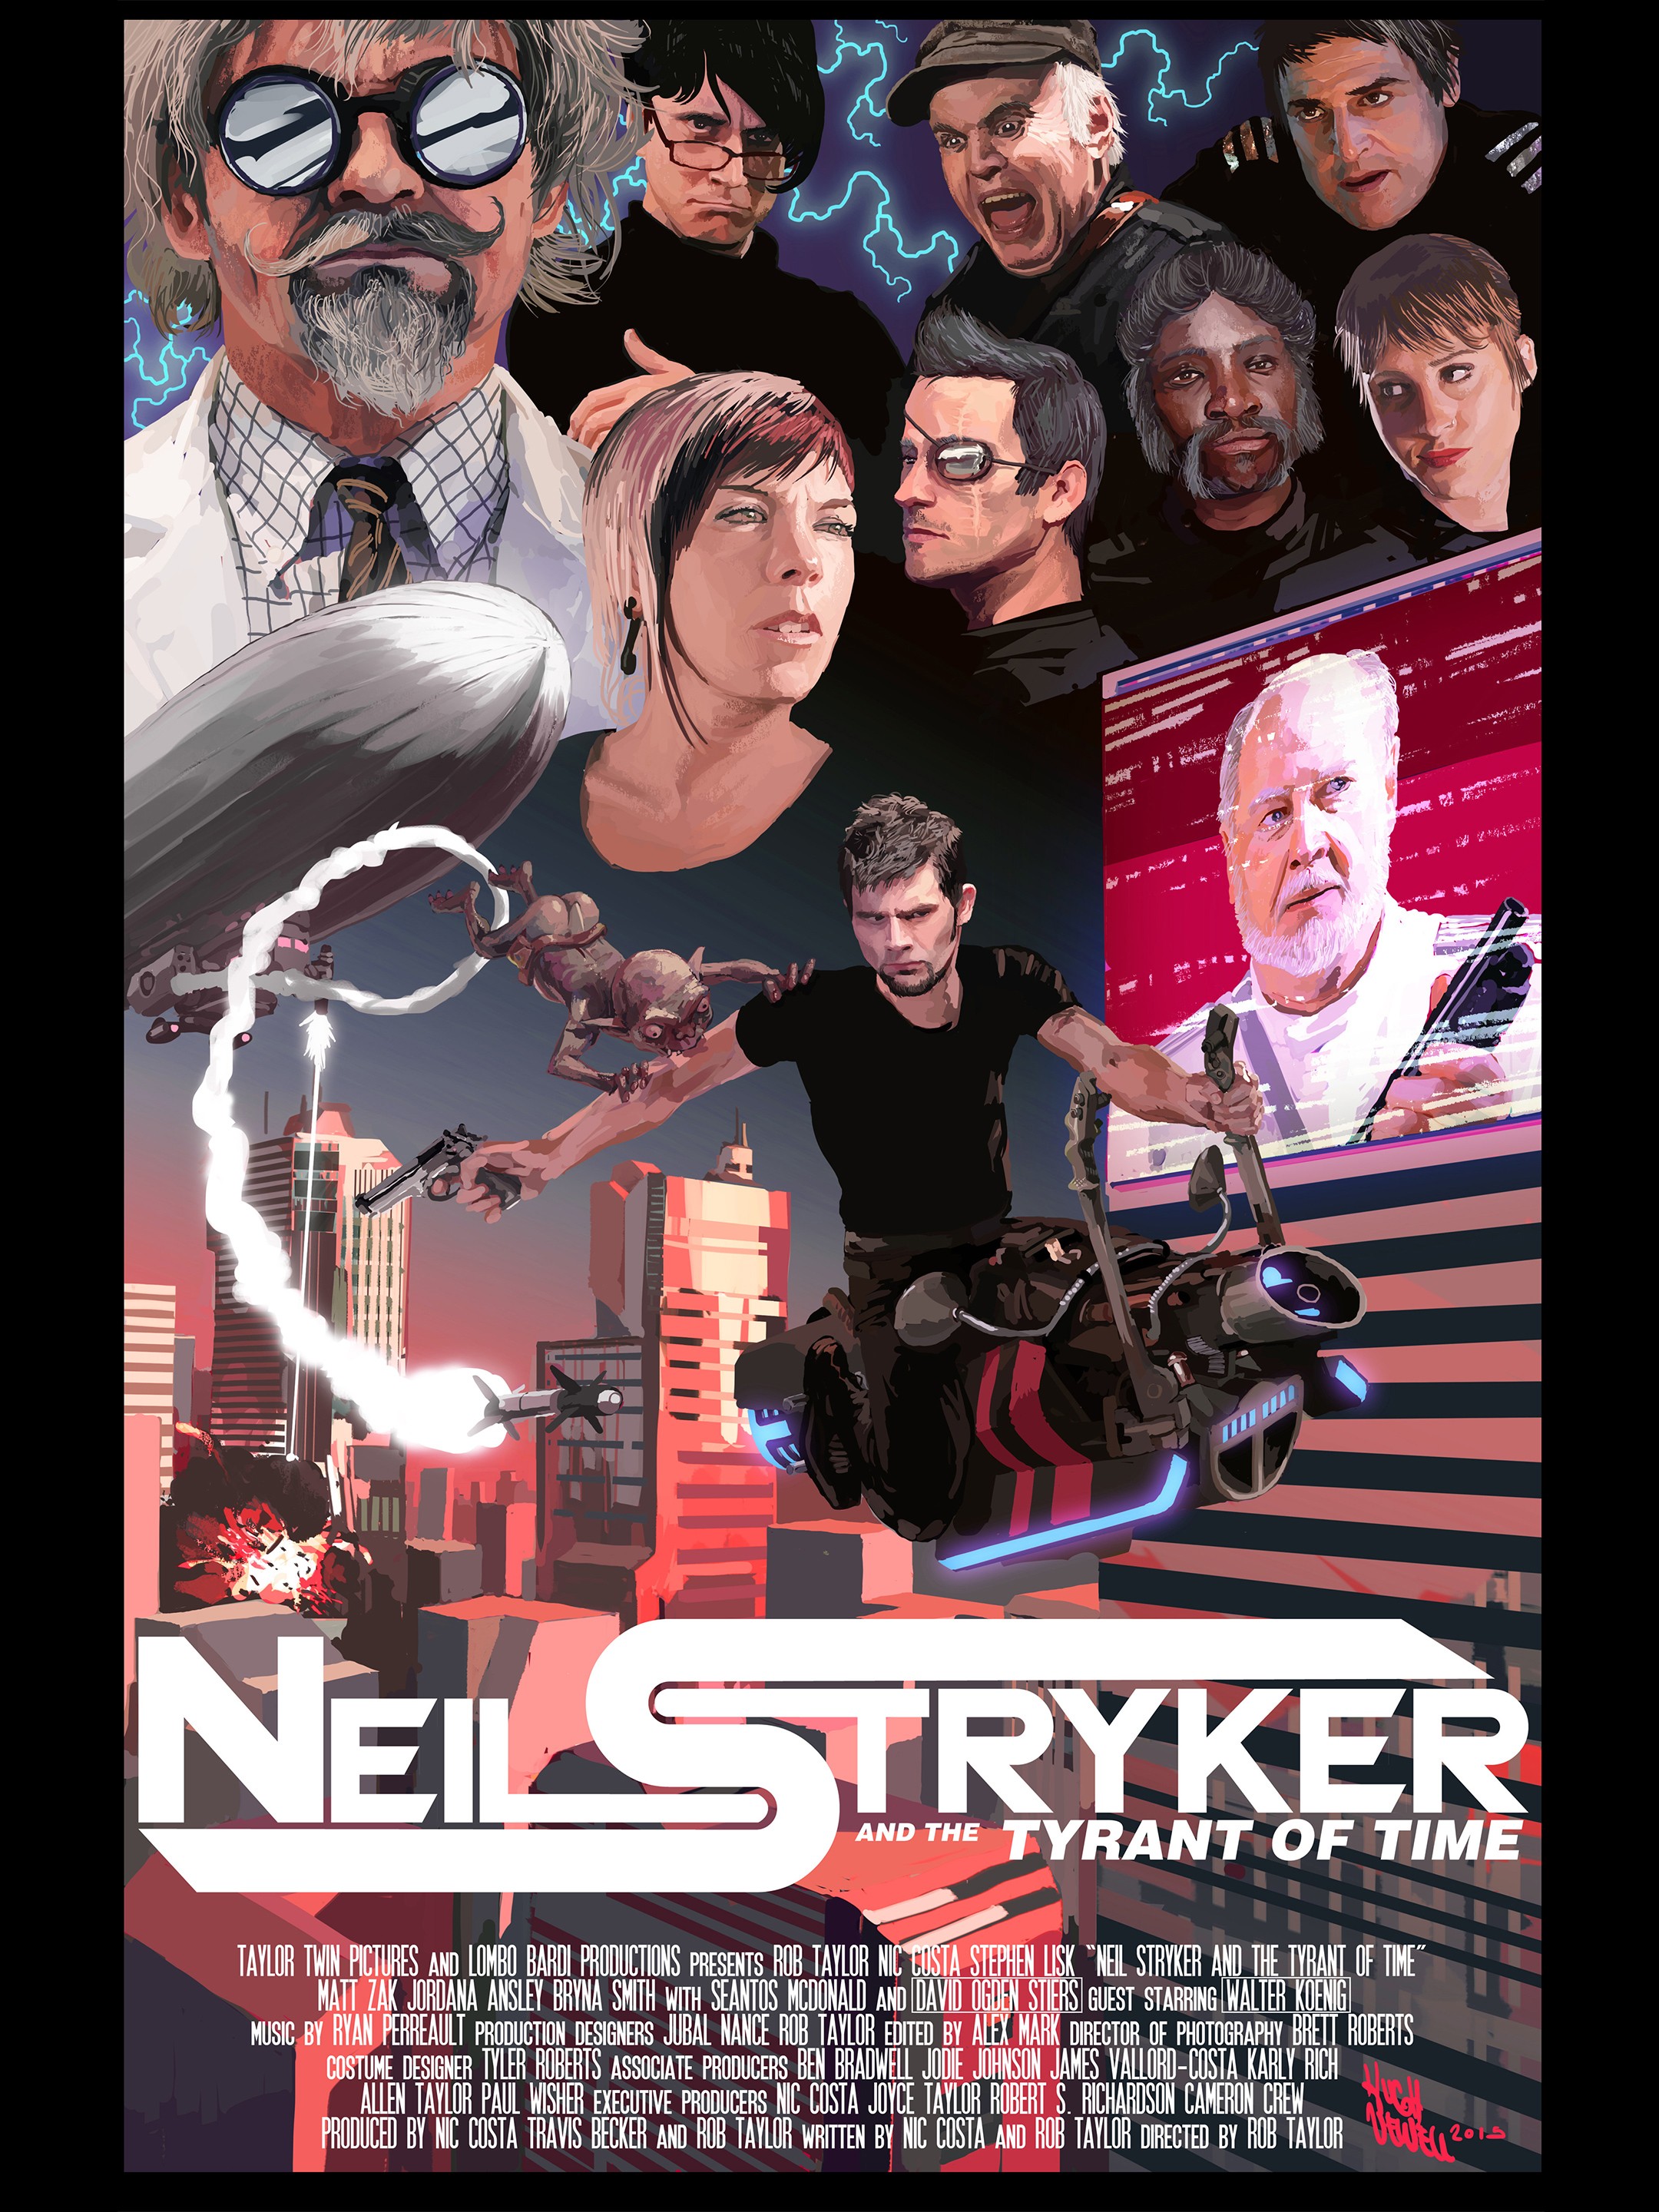 Neil stryker and the tyrant of time